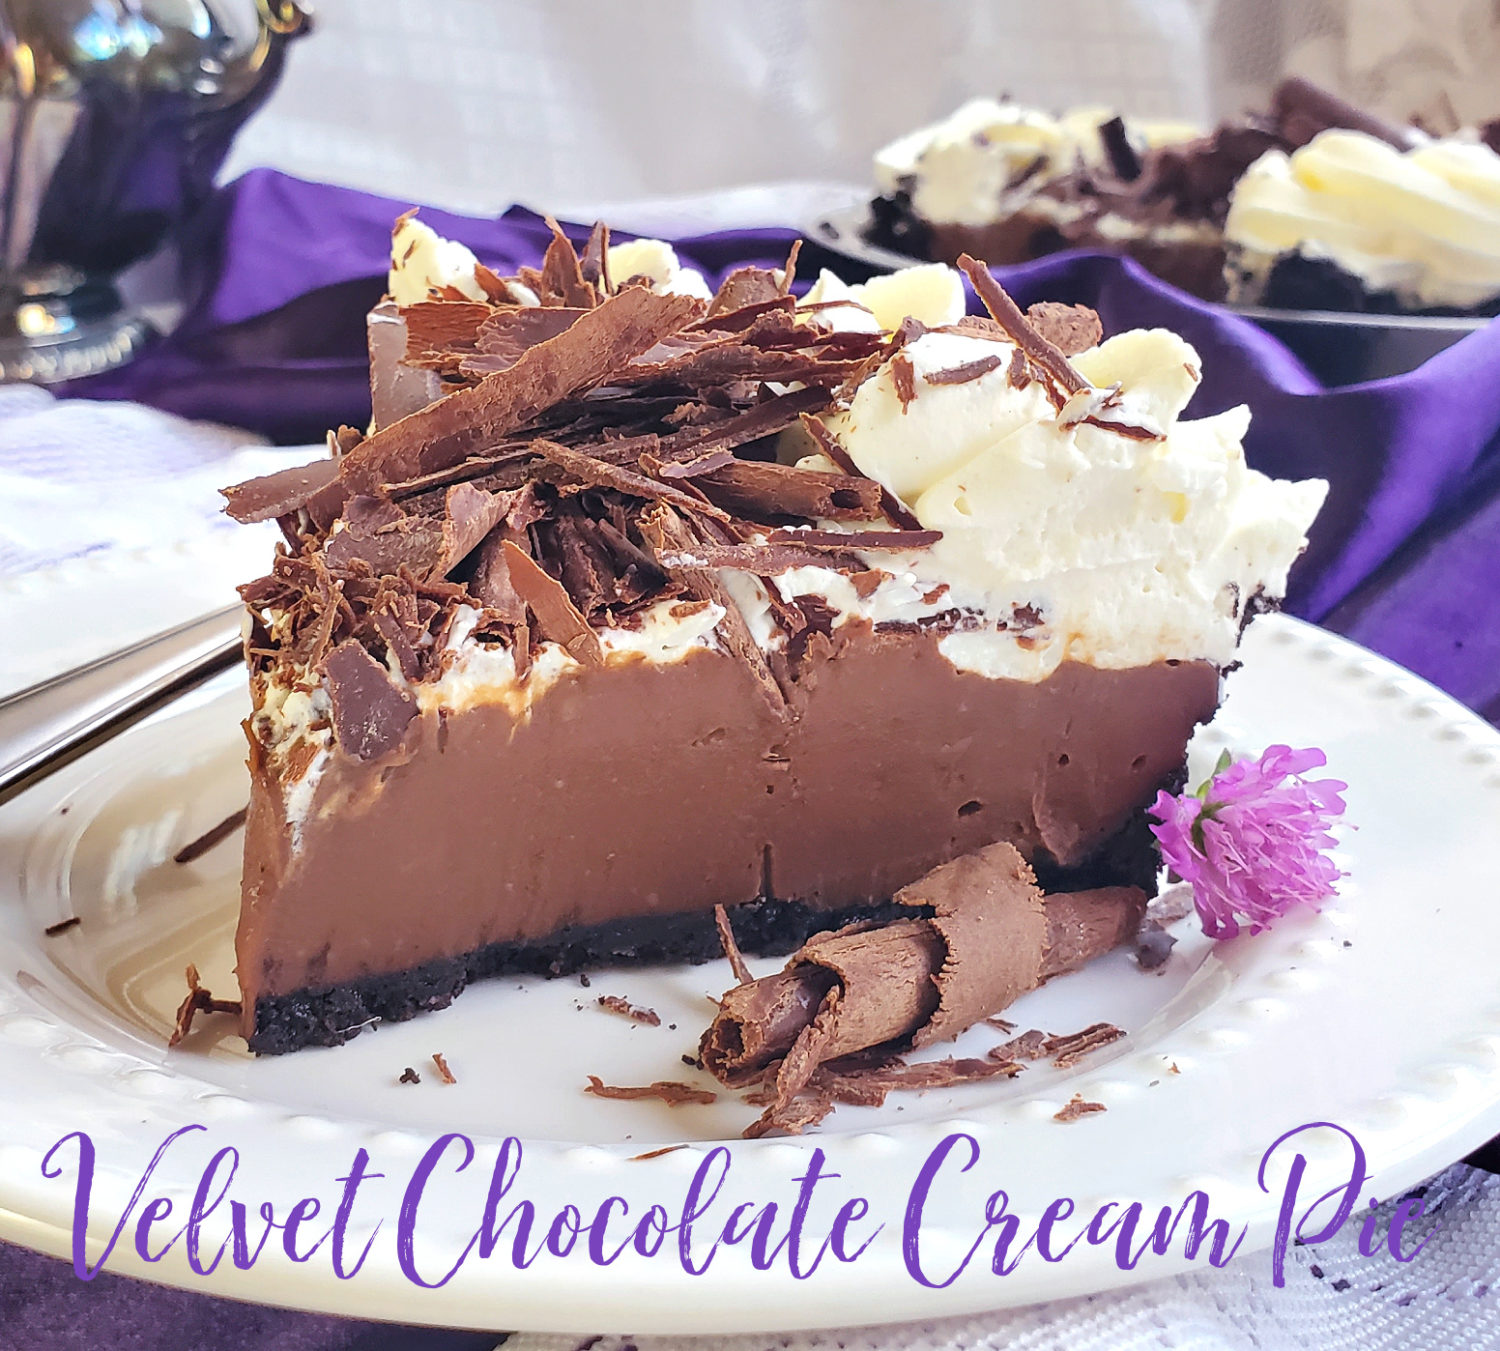 Velvet Chocolate Cream: Two varieties of decadent chocolate combined with cream transformed into a rich & creamy chocolate sinfully delicious cream pie. 